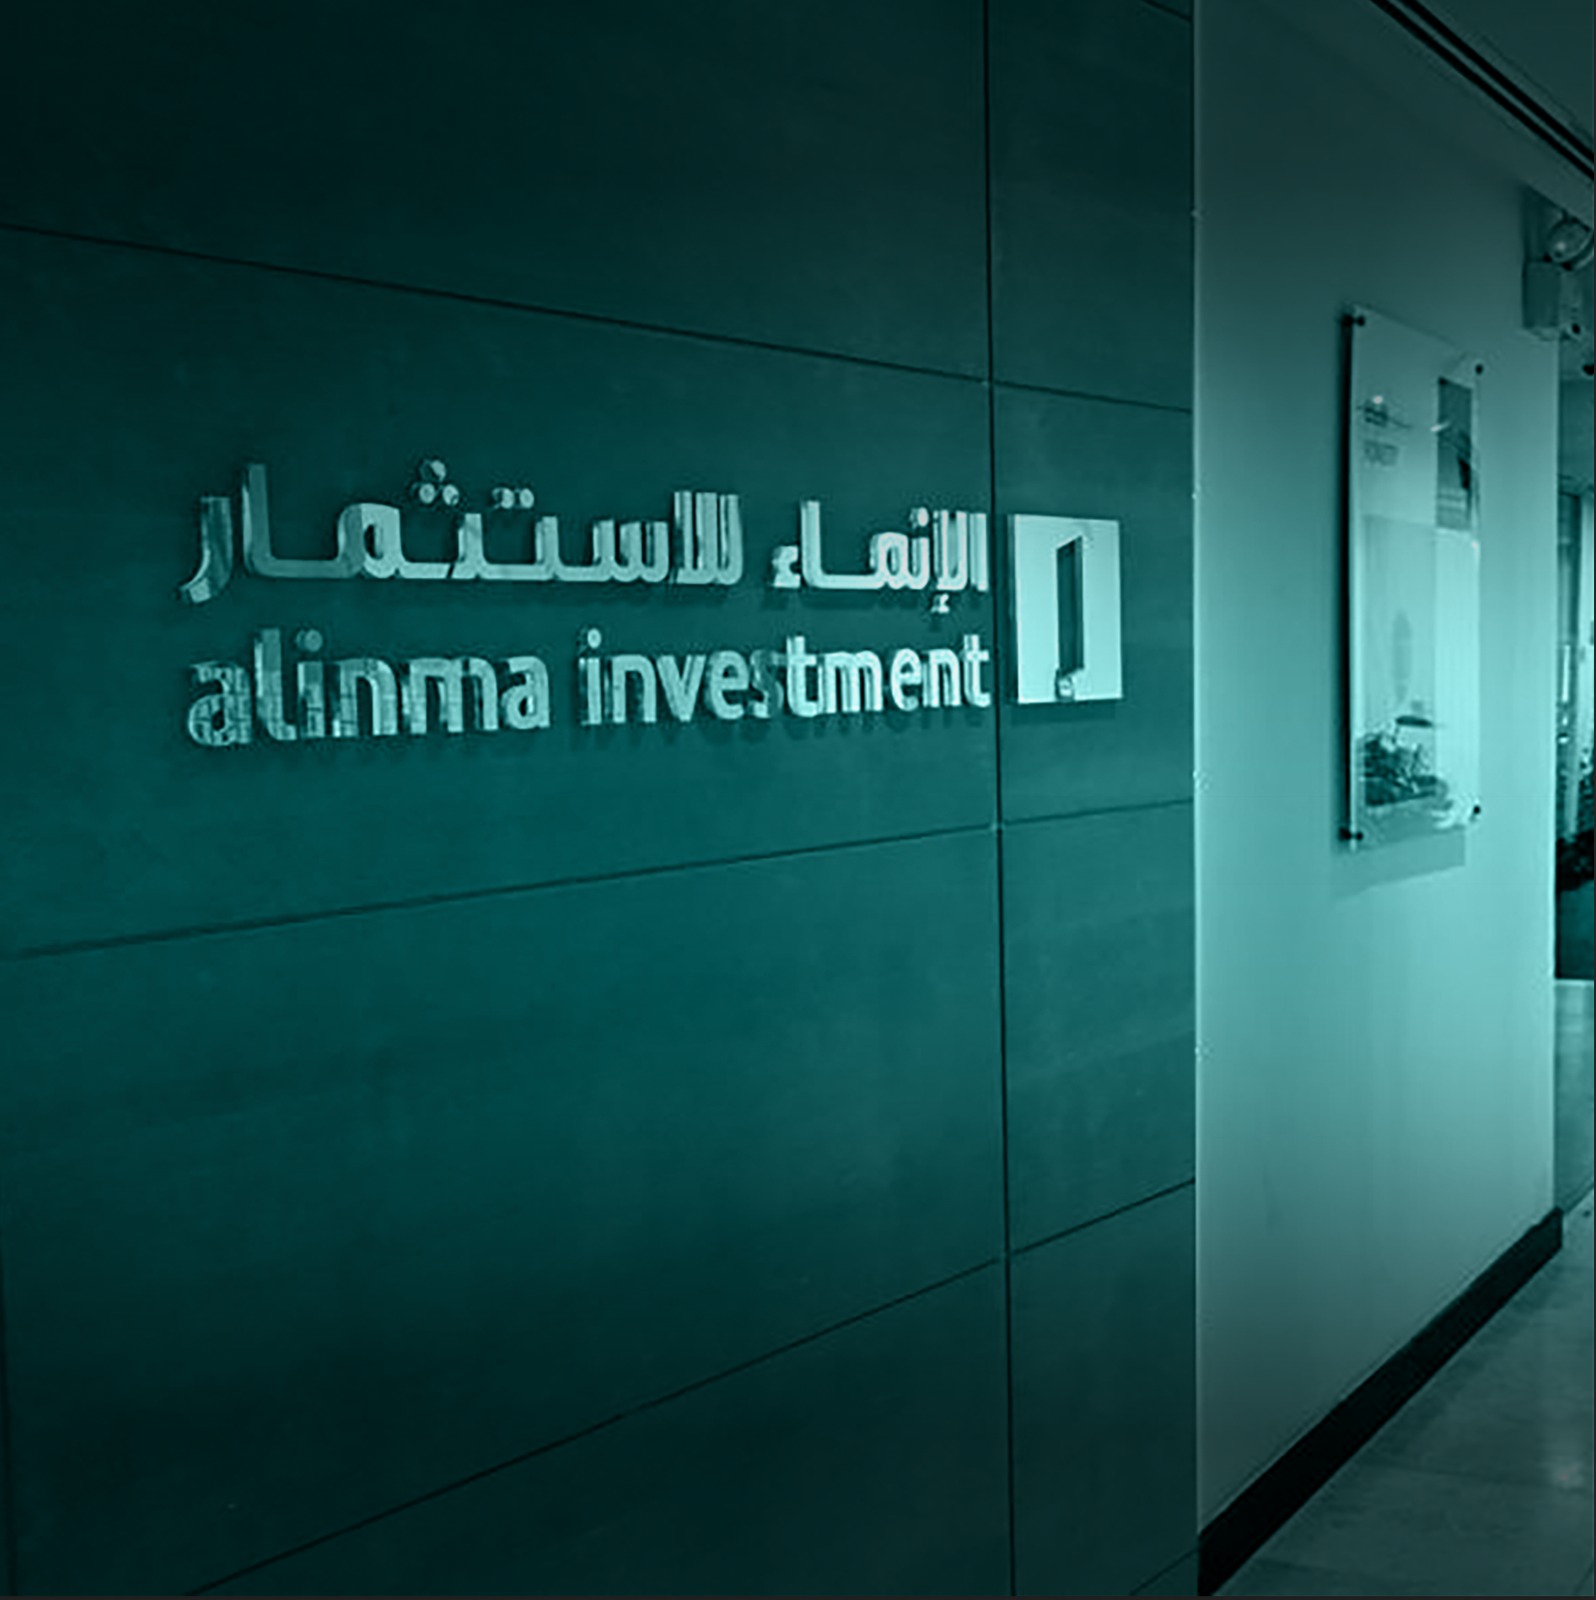 Announcement by Alinma Investment Company that Alinma Saudi Government Sukuk ETF Fund Short Maturity annual reports including the annual audited financial statements for the pe